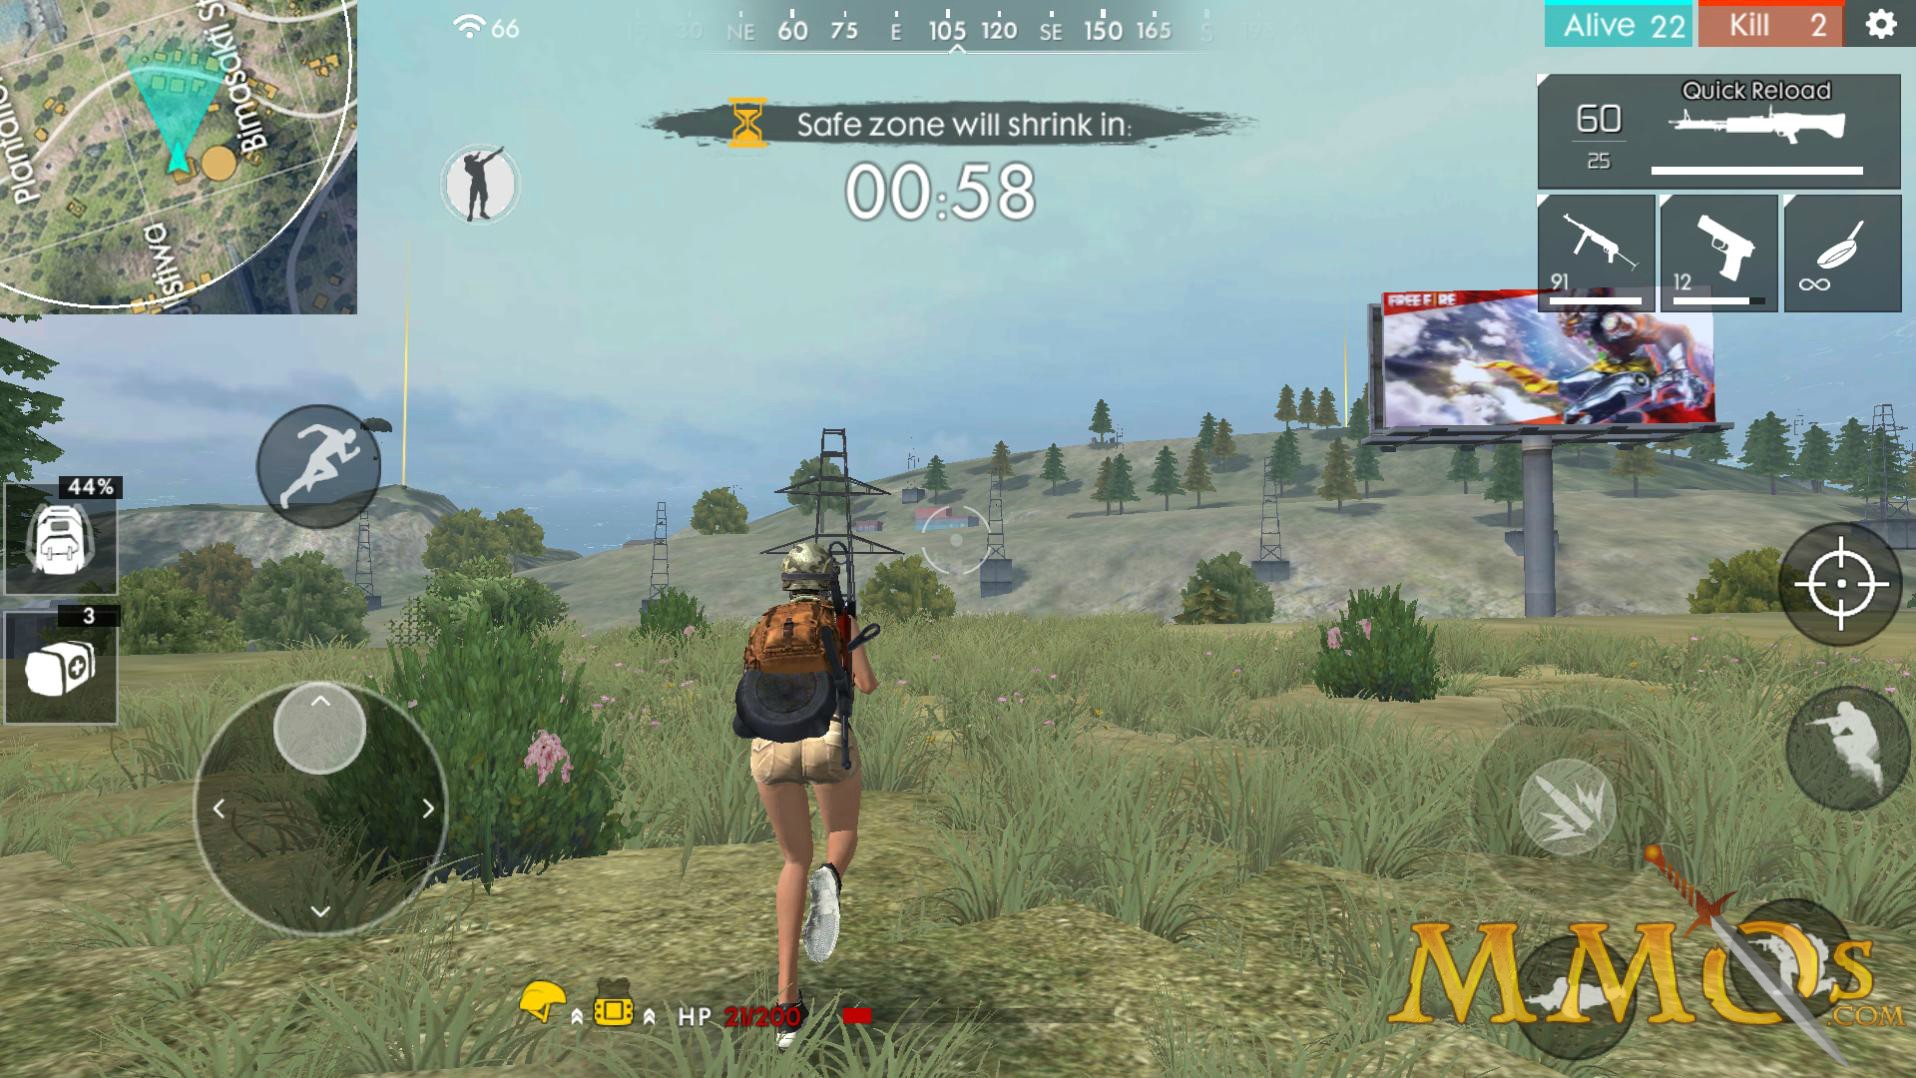 Garena Free Fire Online - Play Free Game Online at